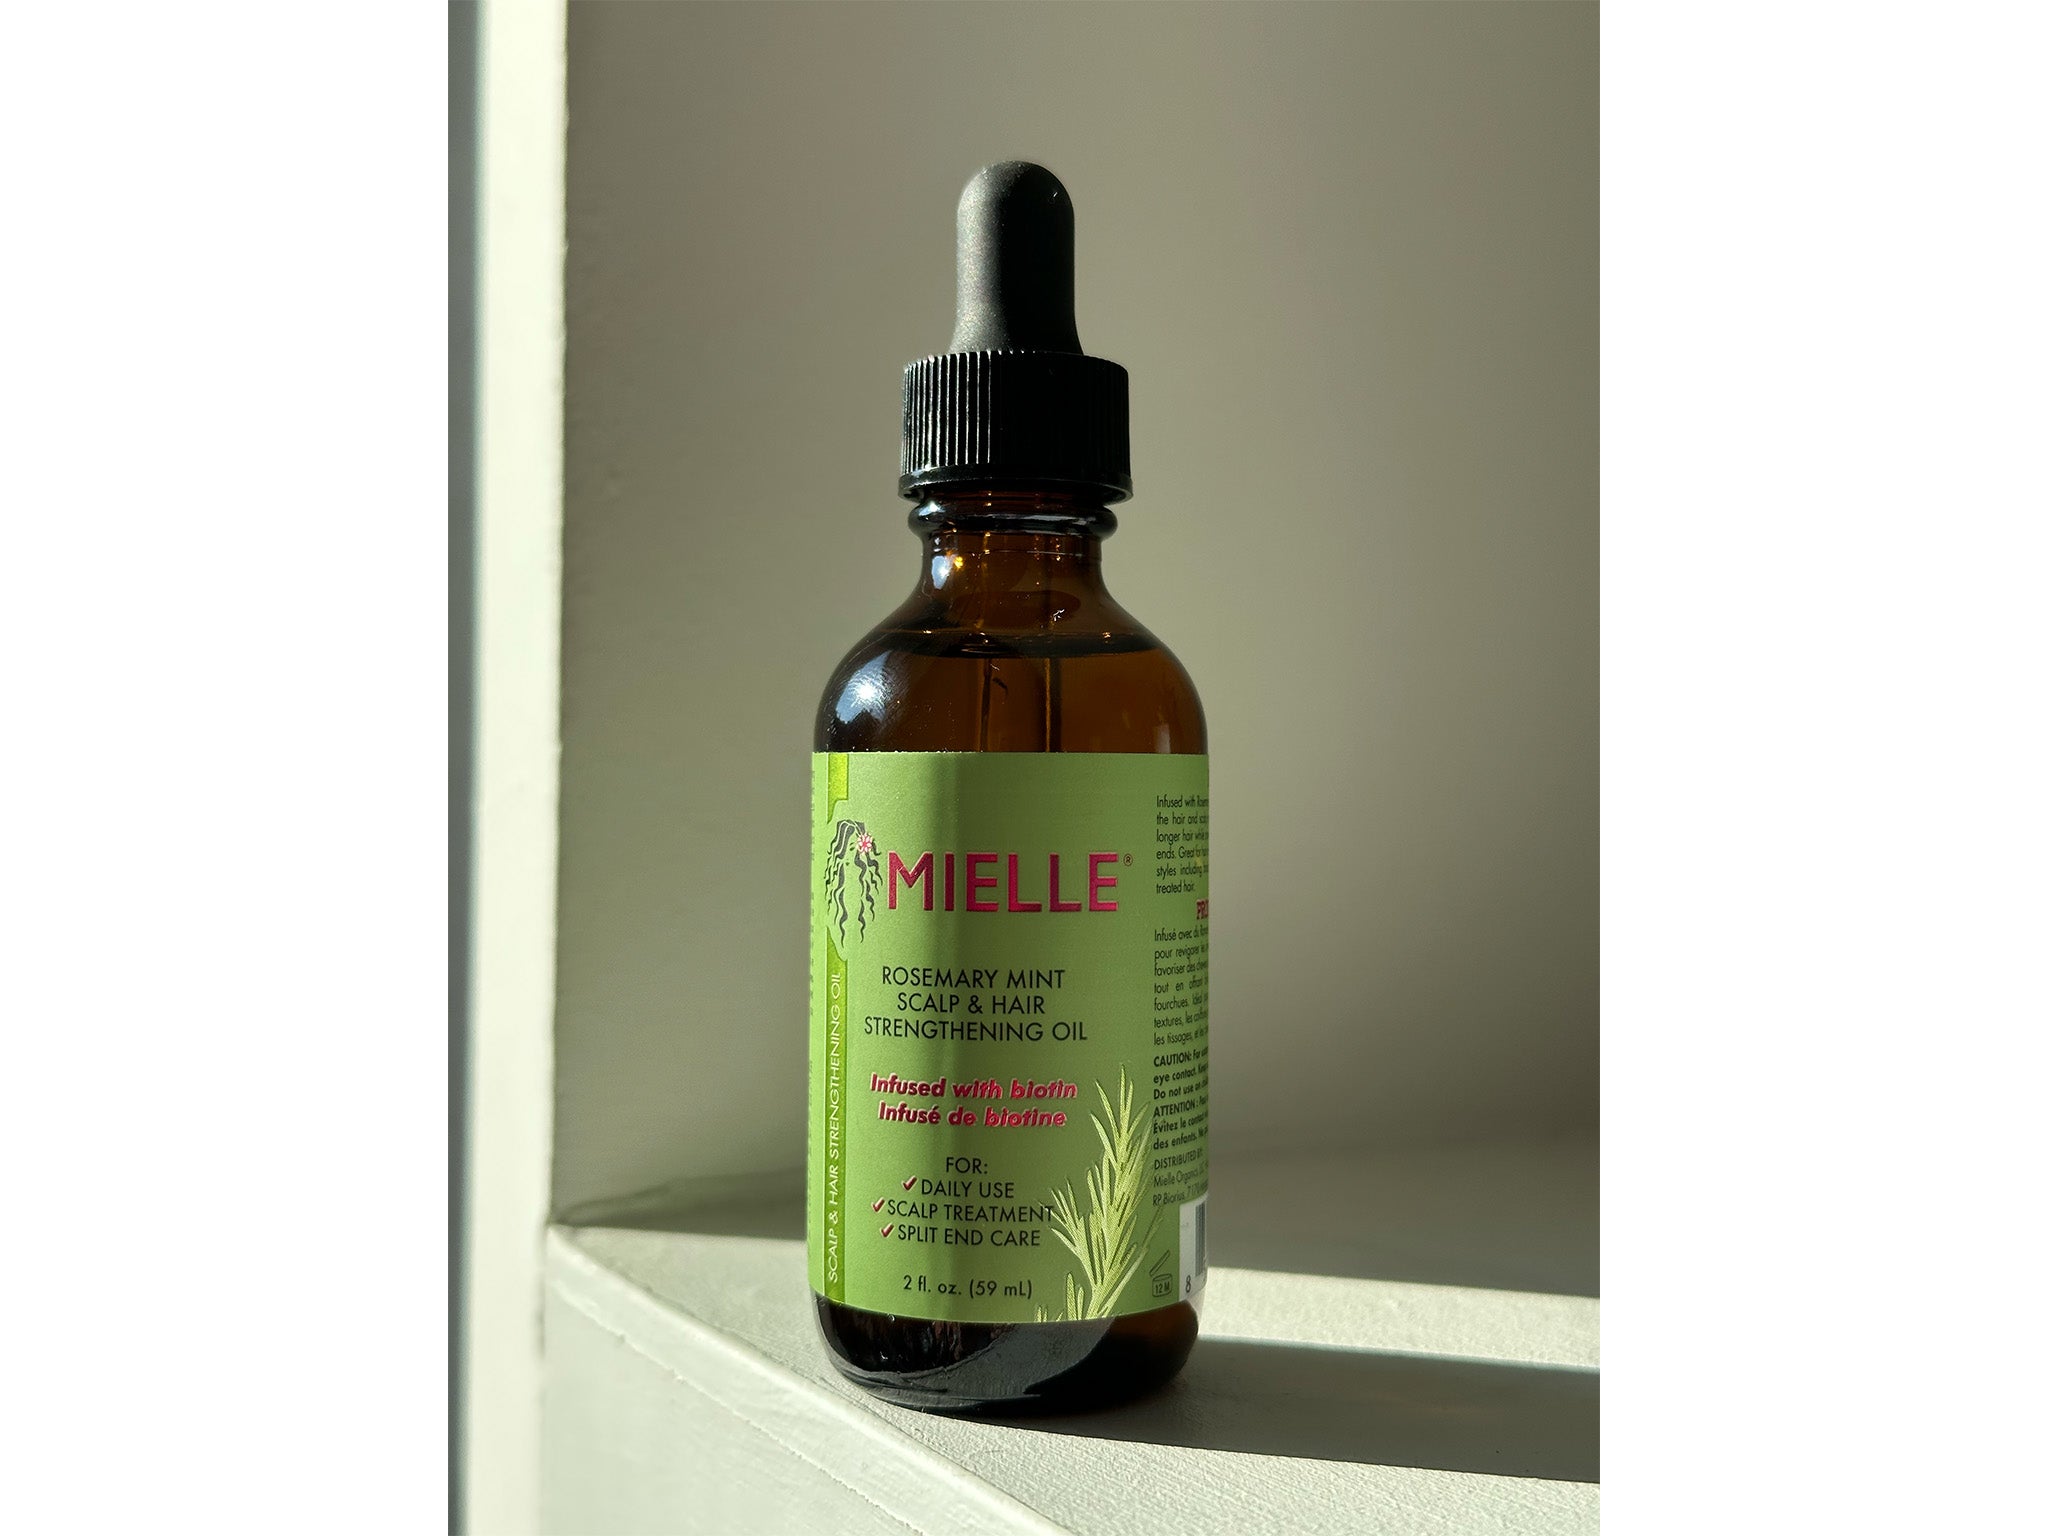 Mielle rosemary mint scalp and hair strengthening oil review